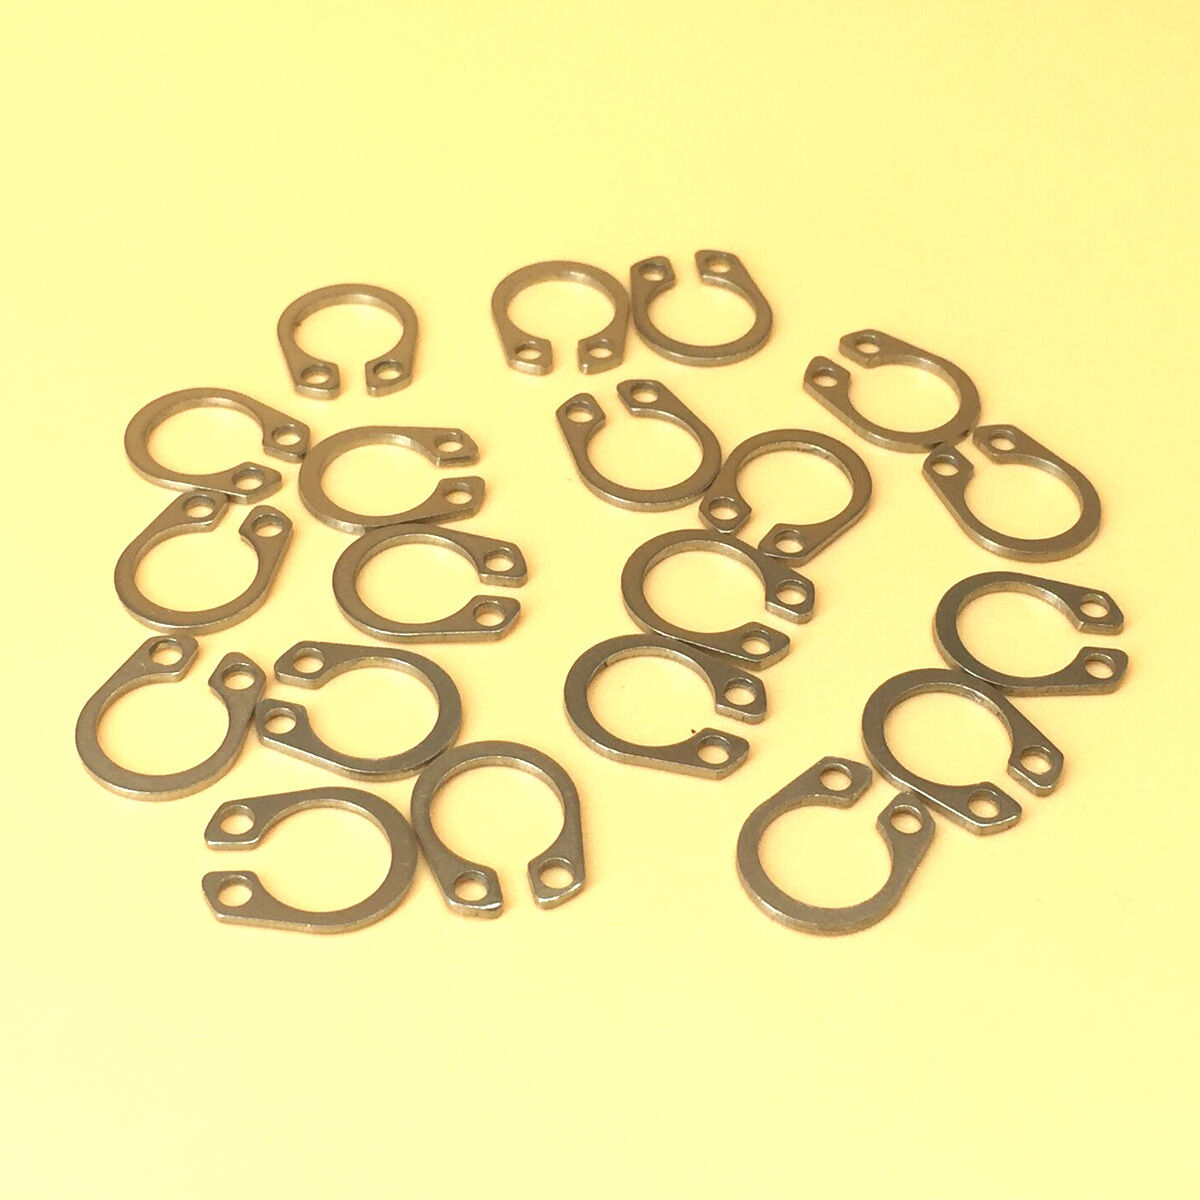 30 kinds of 304 Stainless Steel Circlip Retaining Ring Snap Ring Assortment Kit